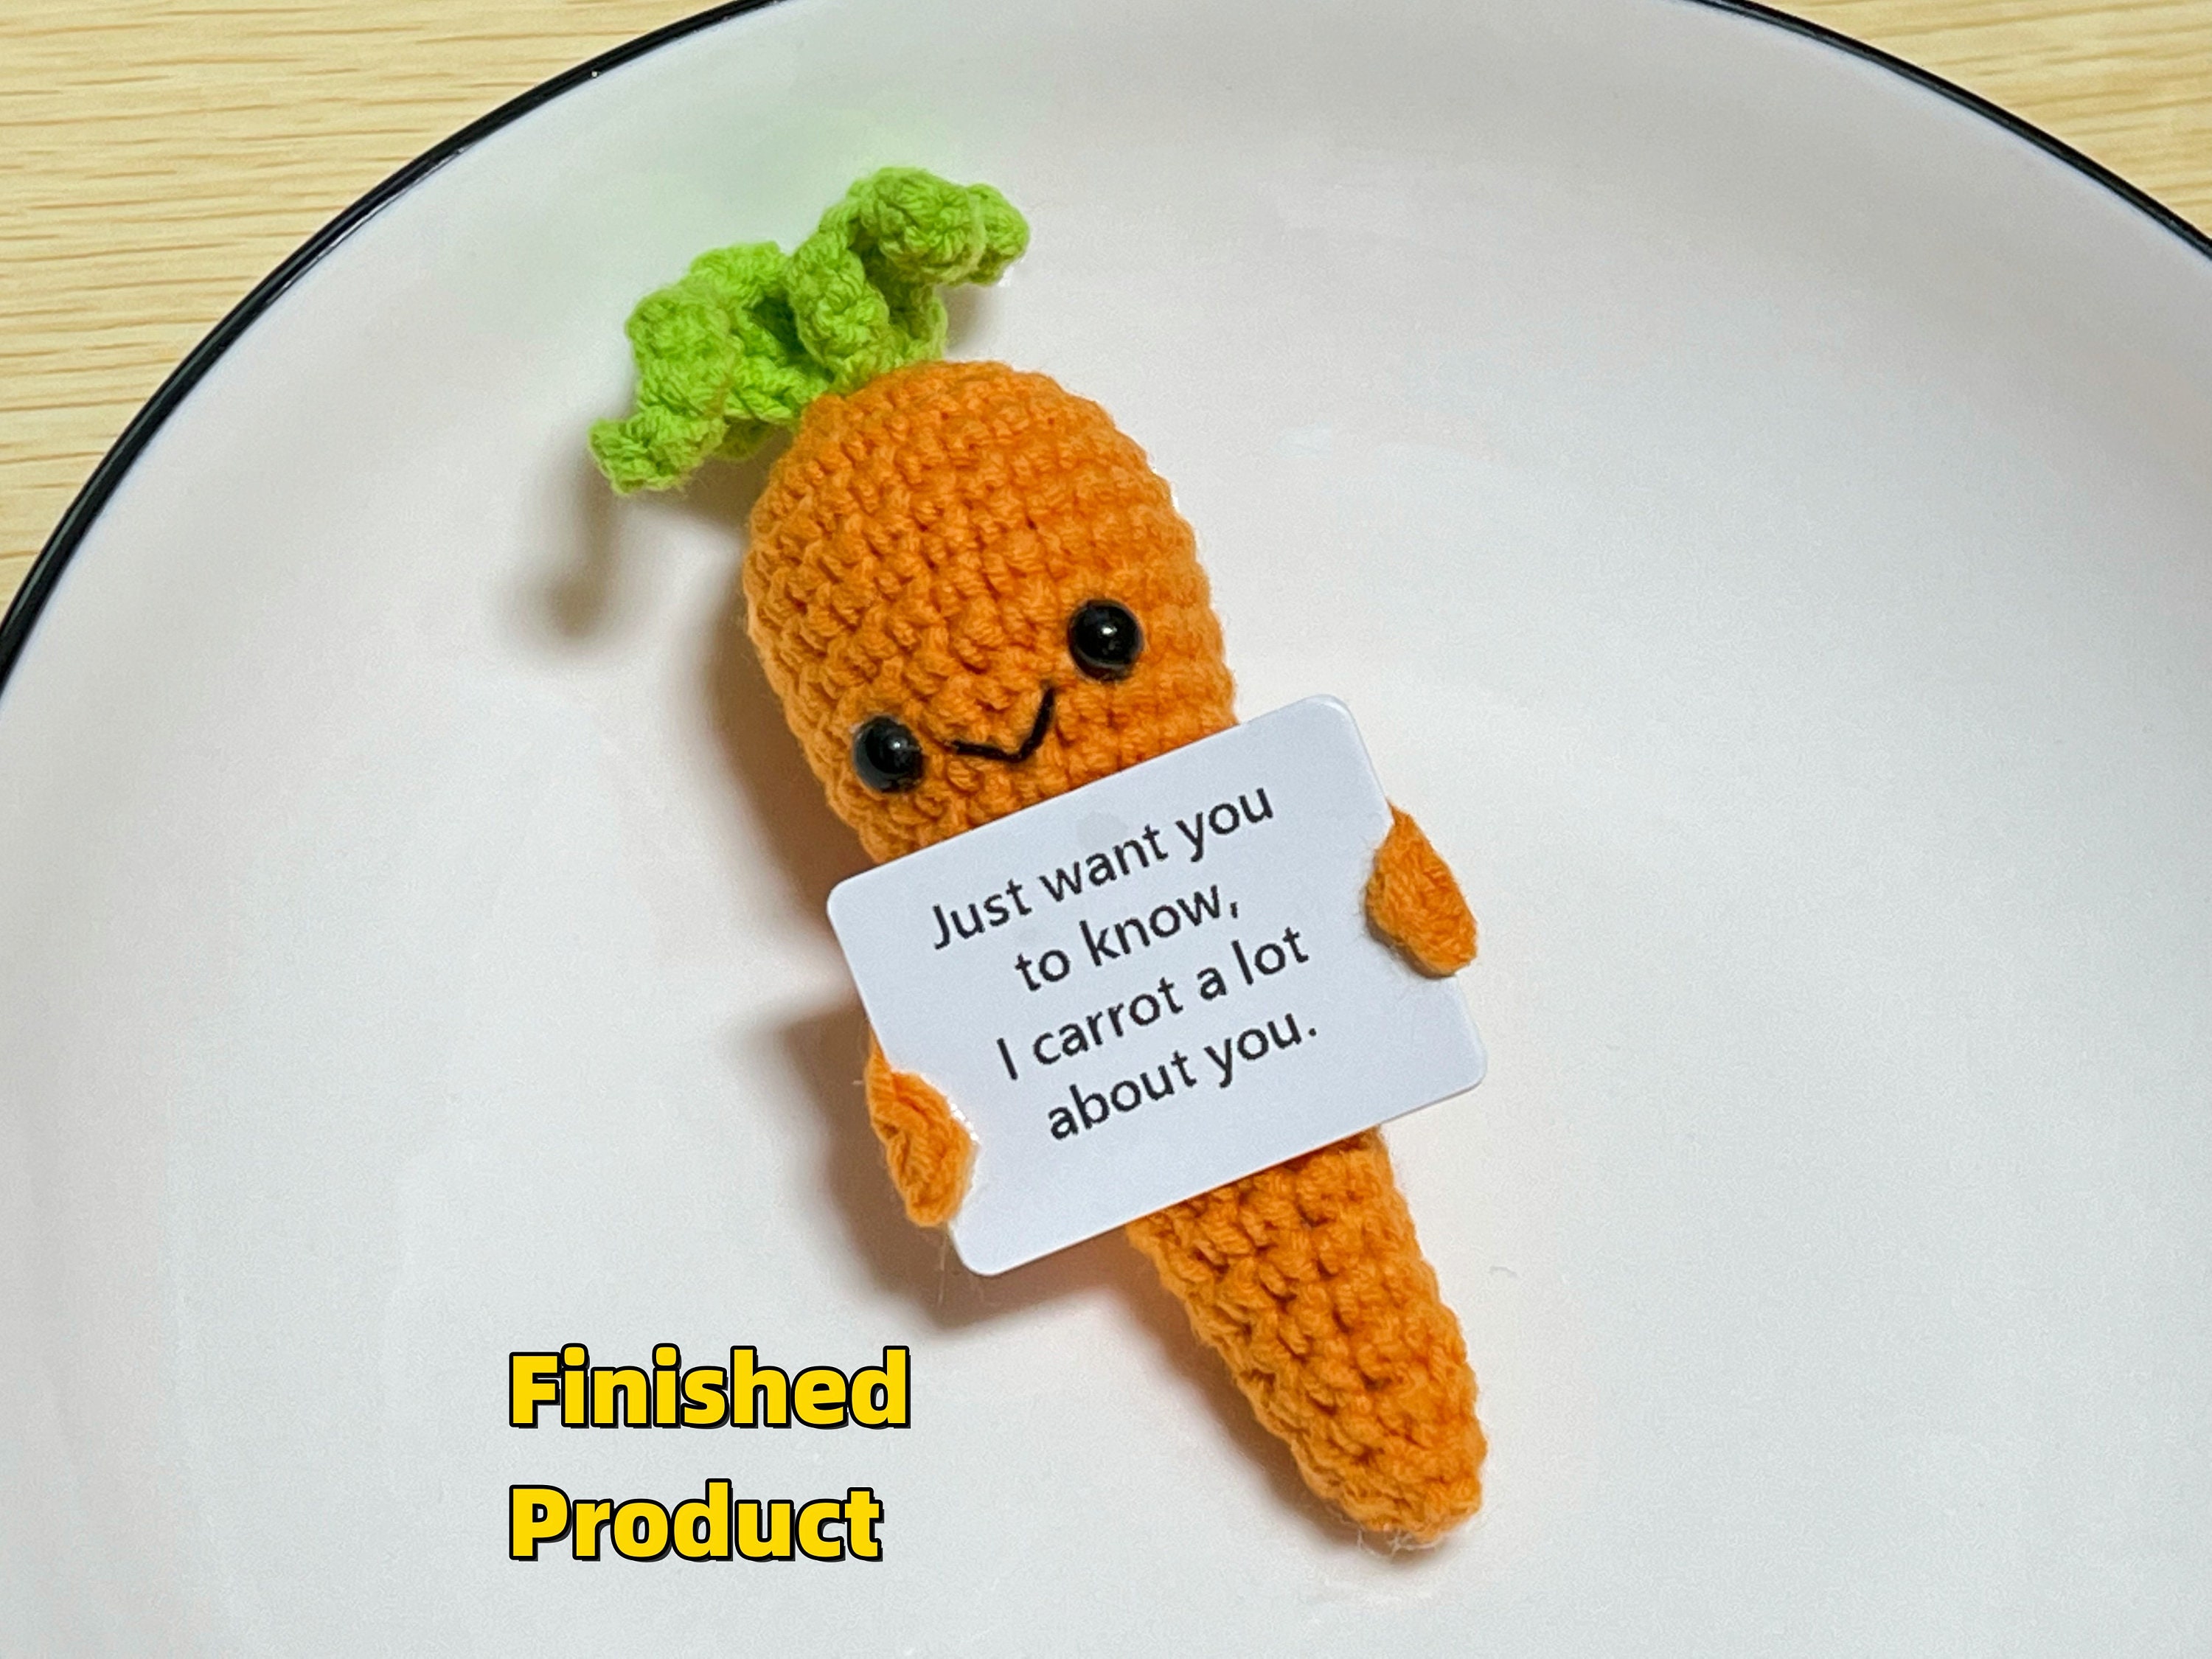 Handmade Emotional Support Pickle Crochet Smiley Sour Cucumber